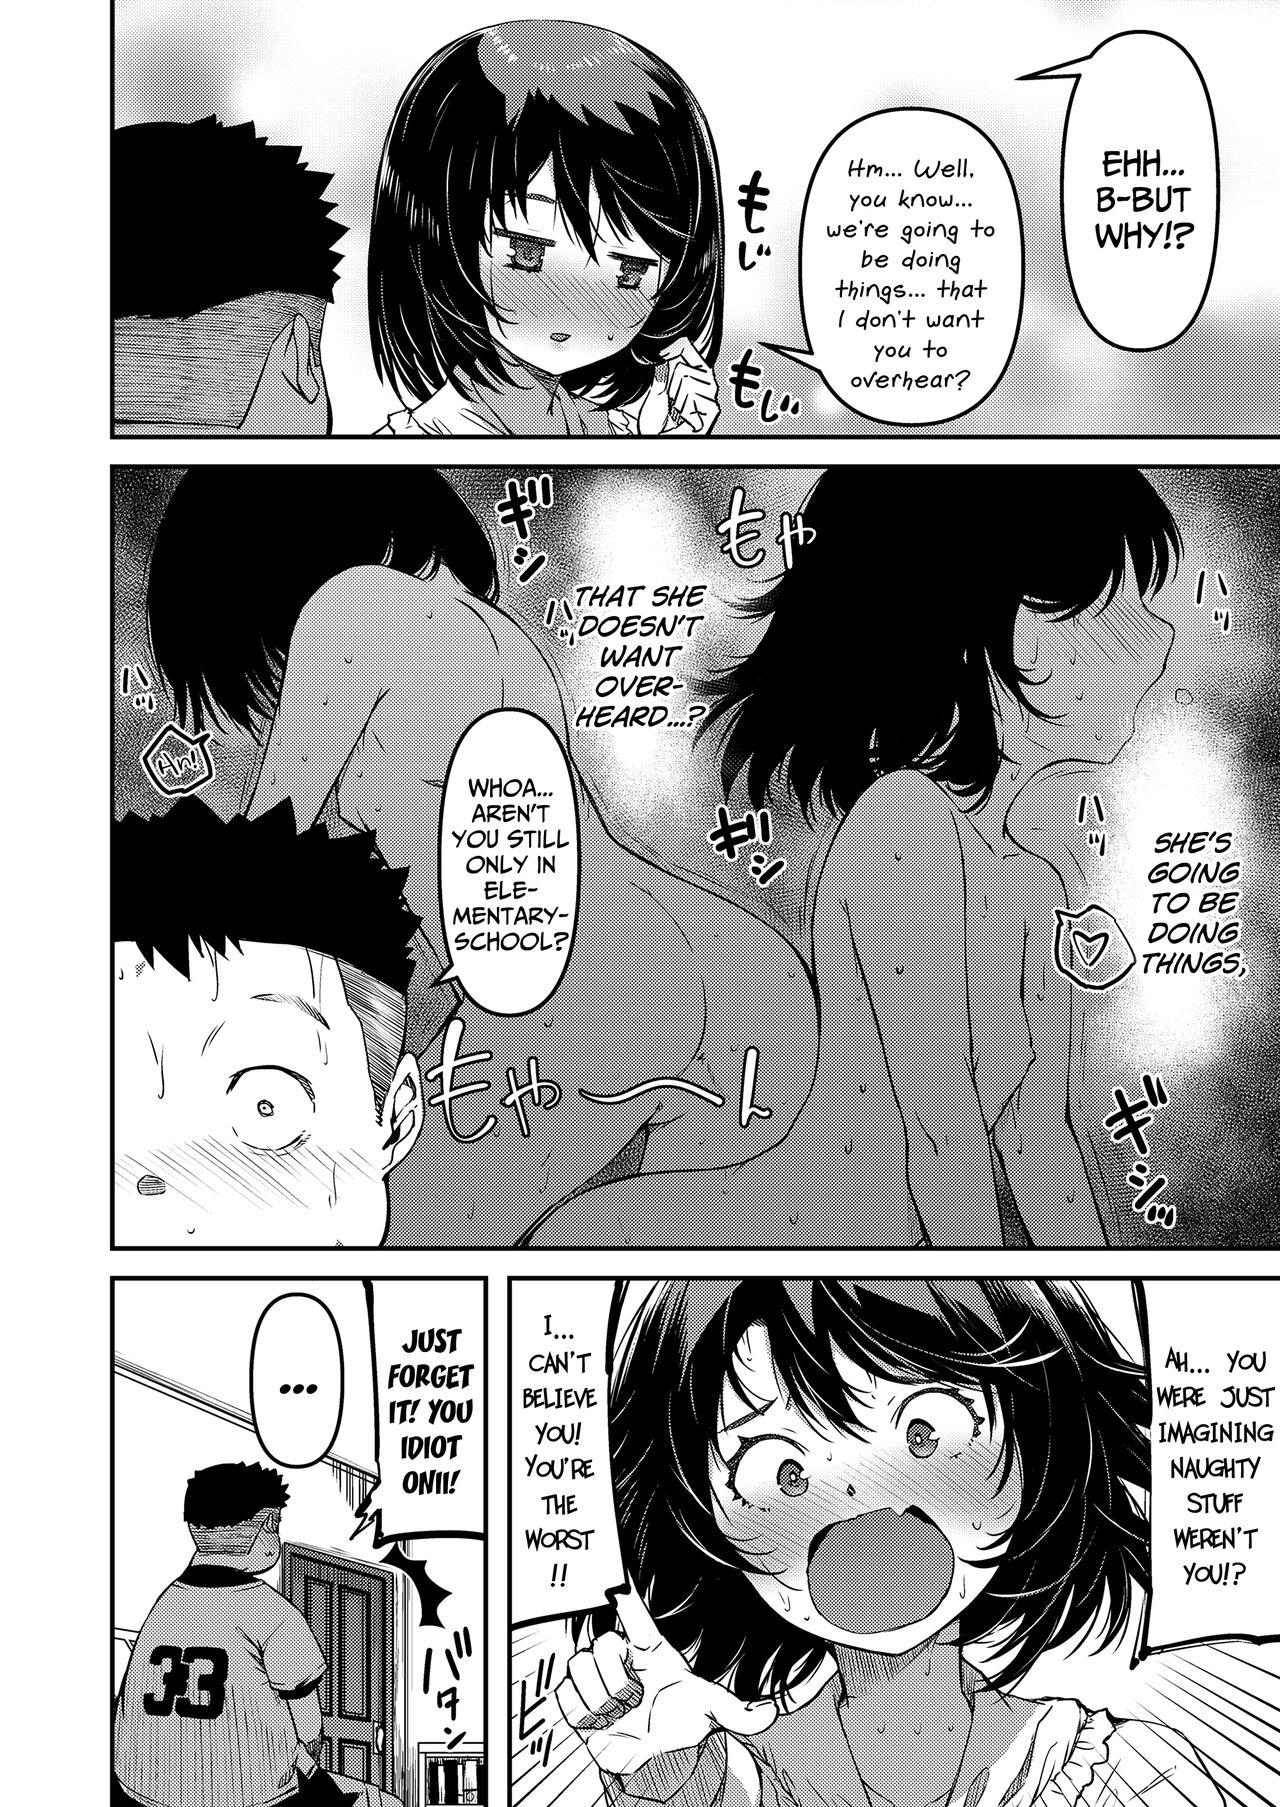 Freaky Omasena Imouto | My Precocious Little-Sister Uncensored - Page 4